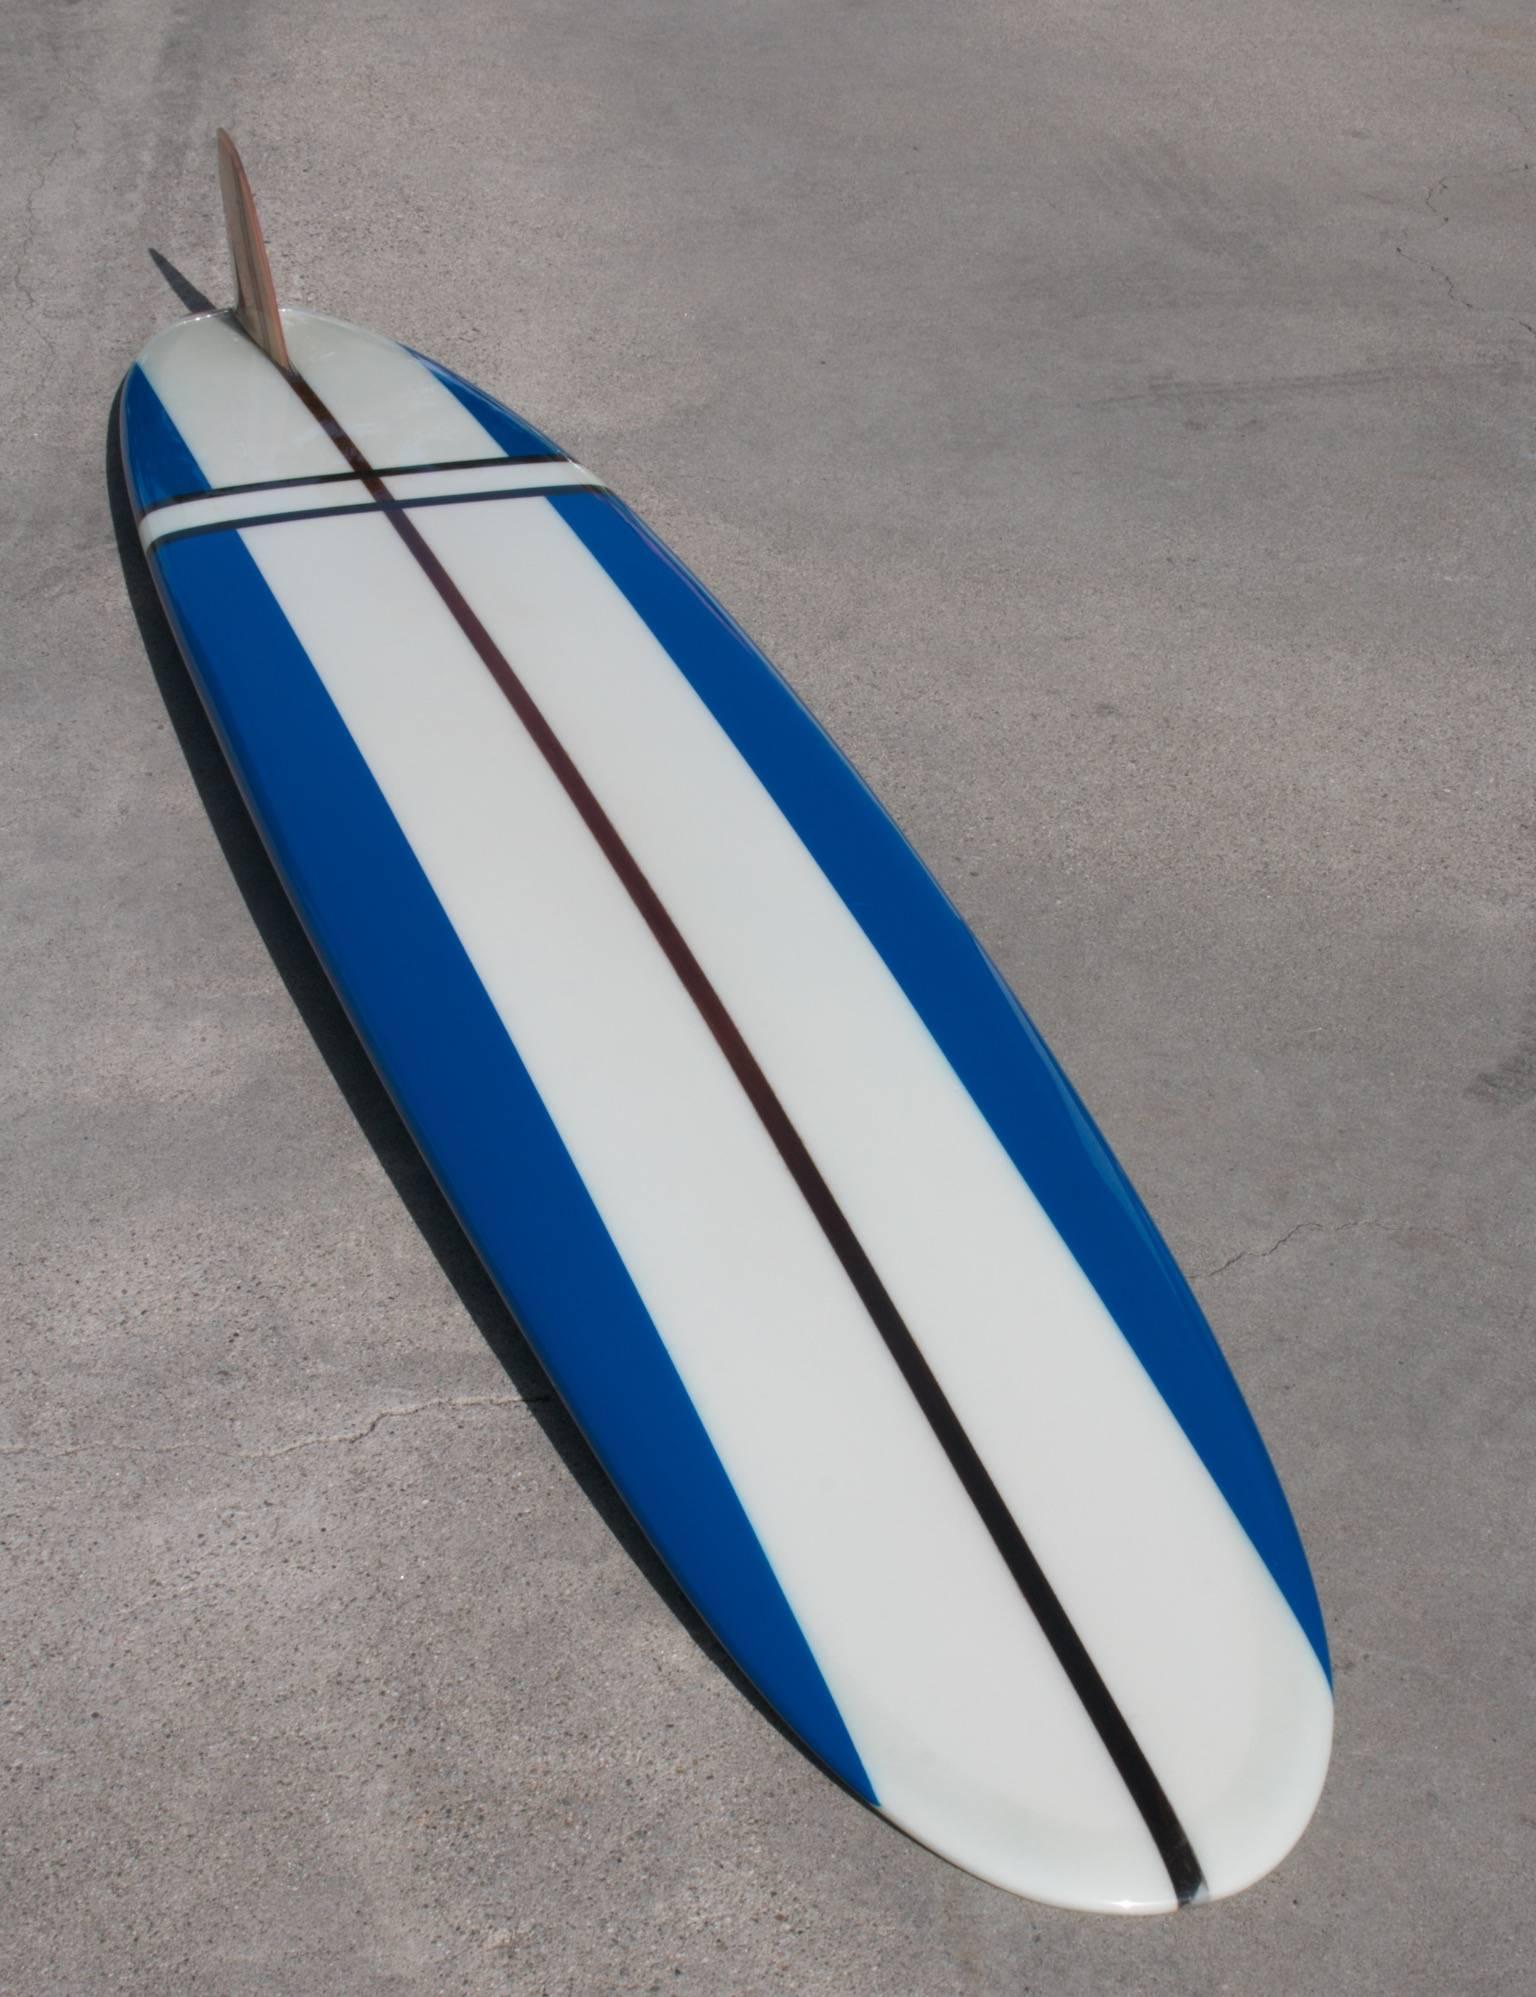 Mid-20th Century Jacobs Surfboard Fully Restored, Blue, White and Red, Early 1960s For Sale